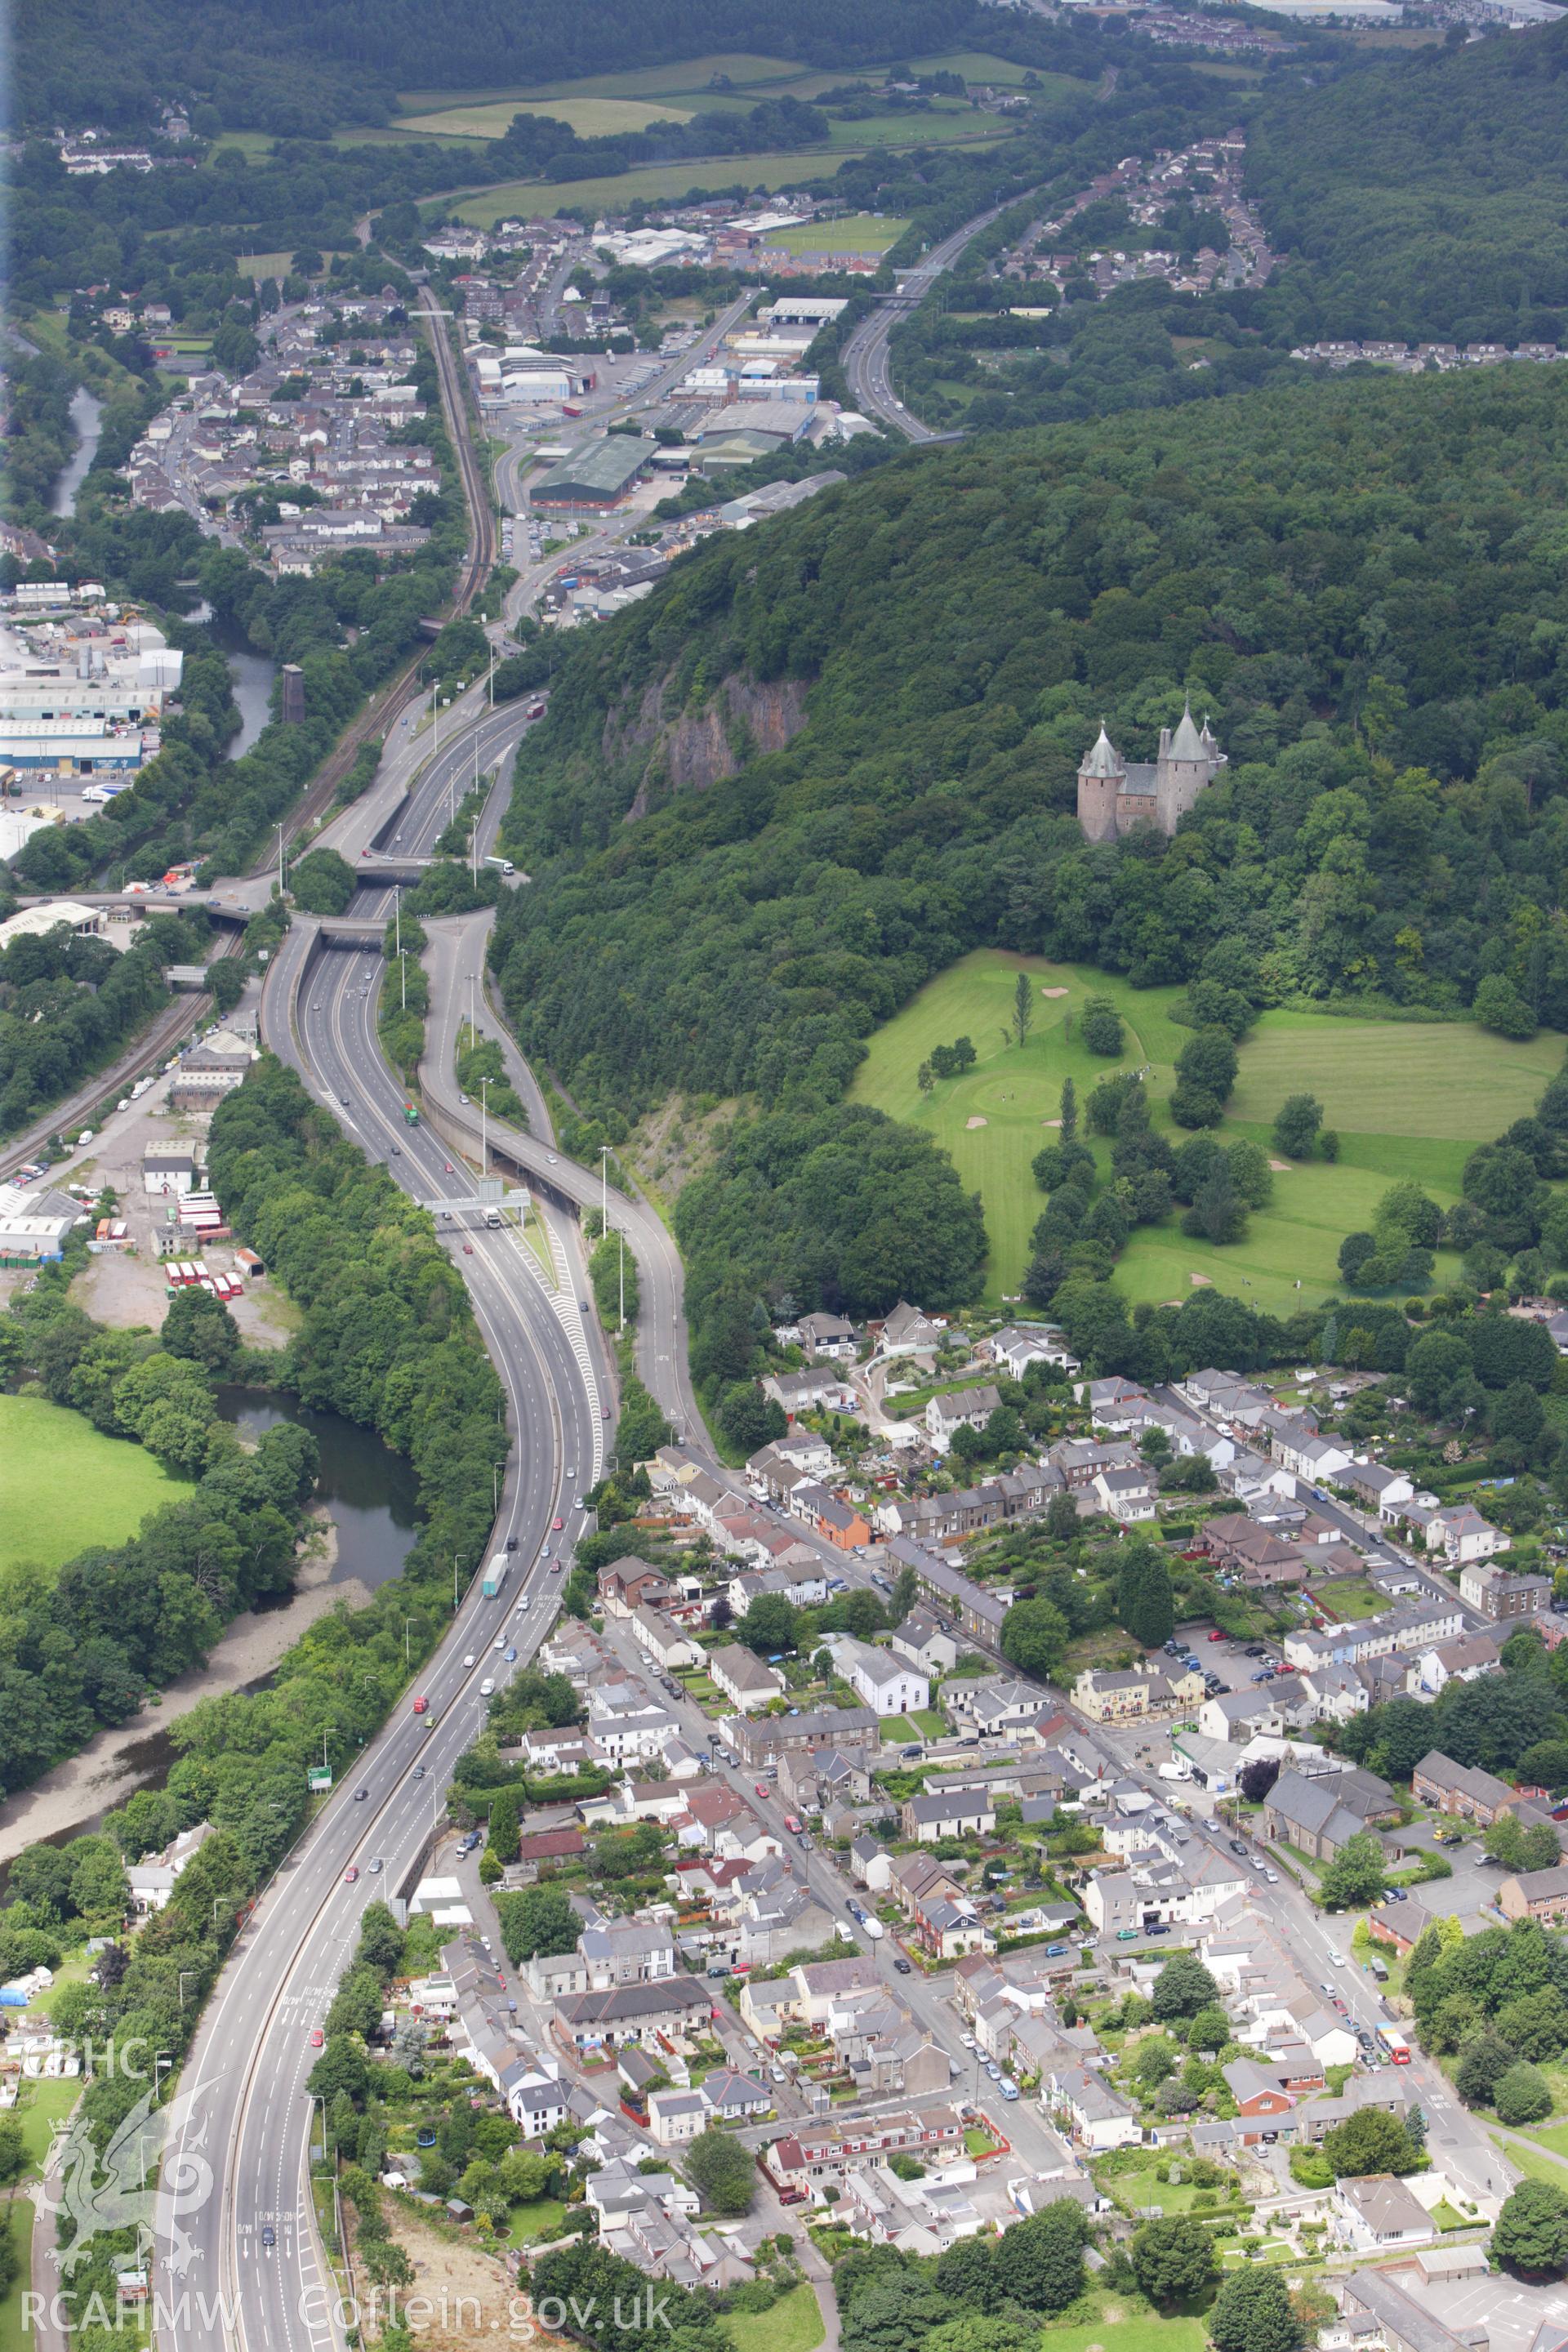 RCAHMW colour oblique aerial photograph of Castell Coch, Tongwynlais. Taken on 09 July 2009 by Toby Driver